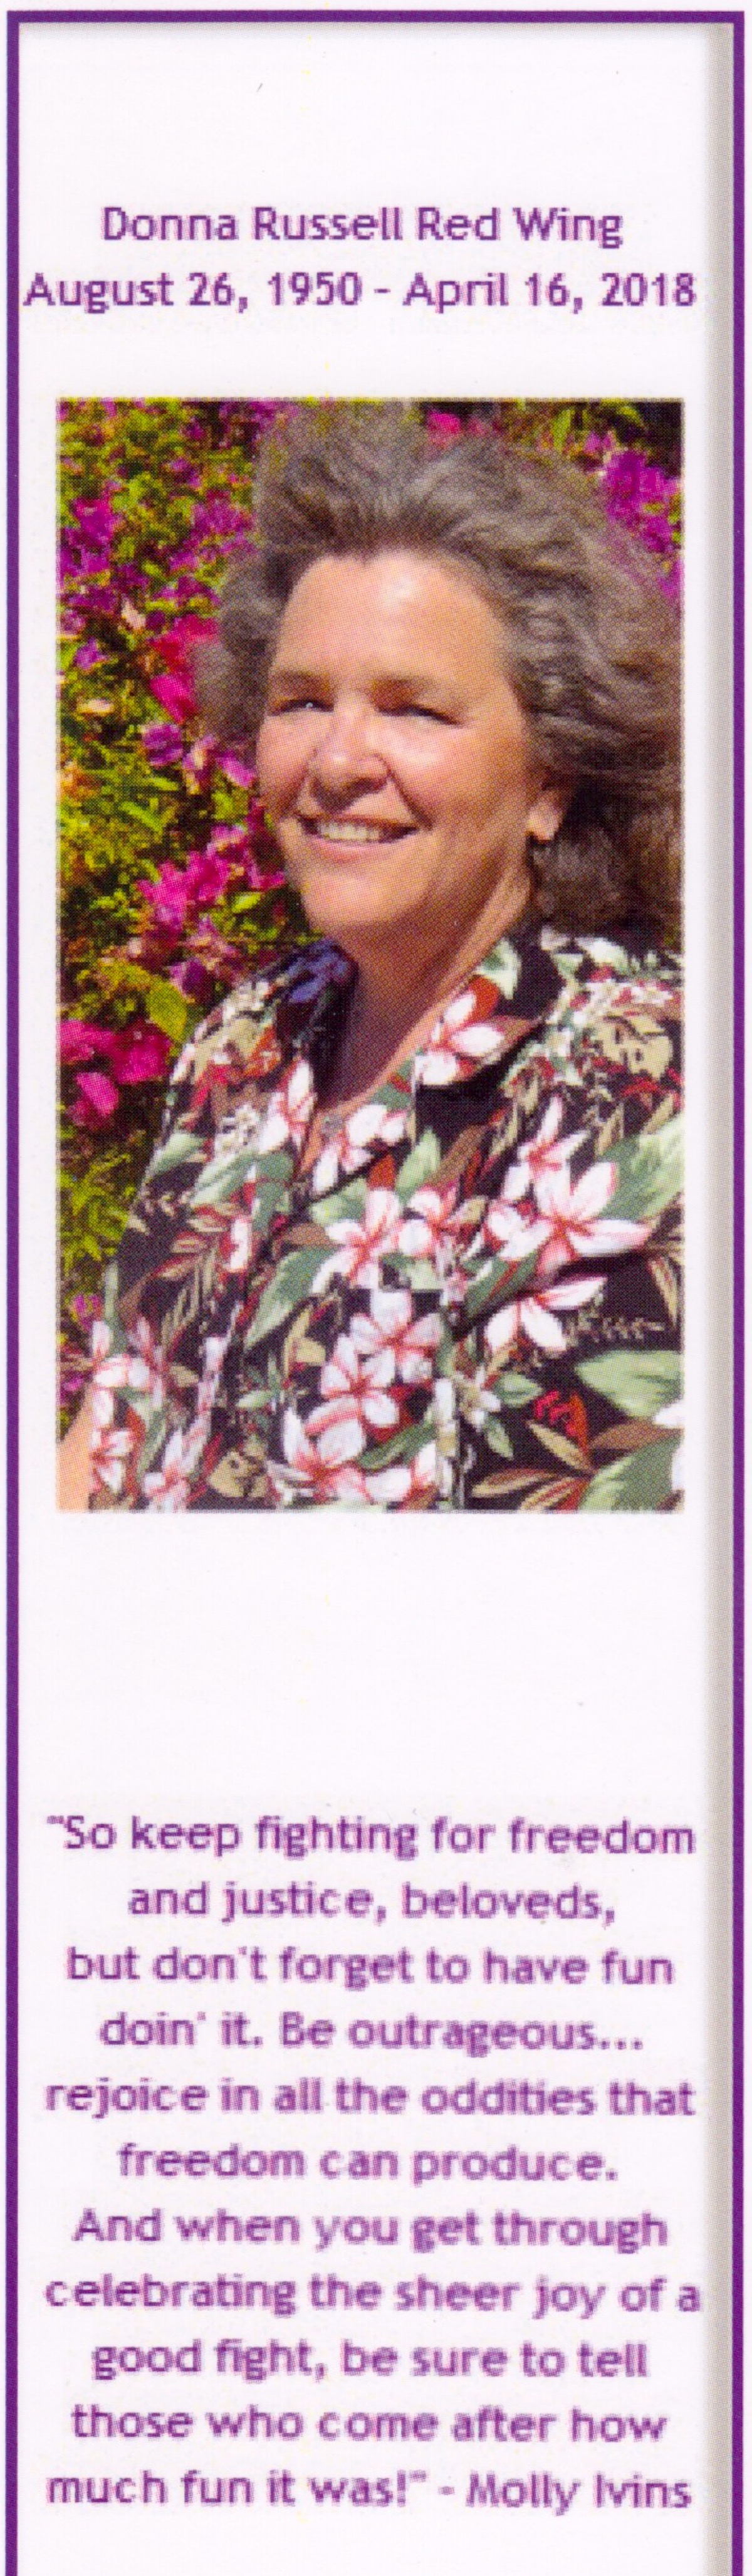 A funeral bookmark featuring a portrait of Donna that reads, “Donna Russell Red Wing, August 26, 1950 - April 16, 2018.”